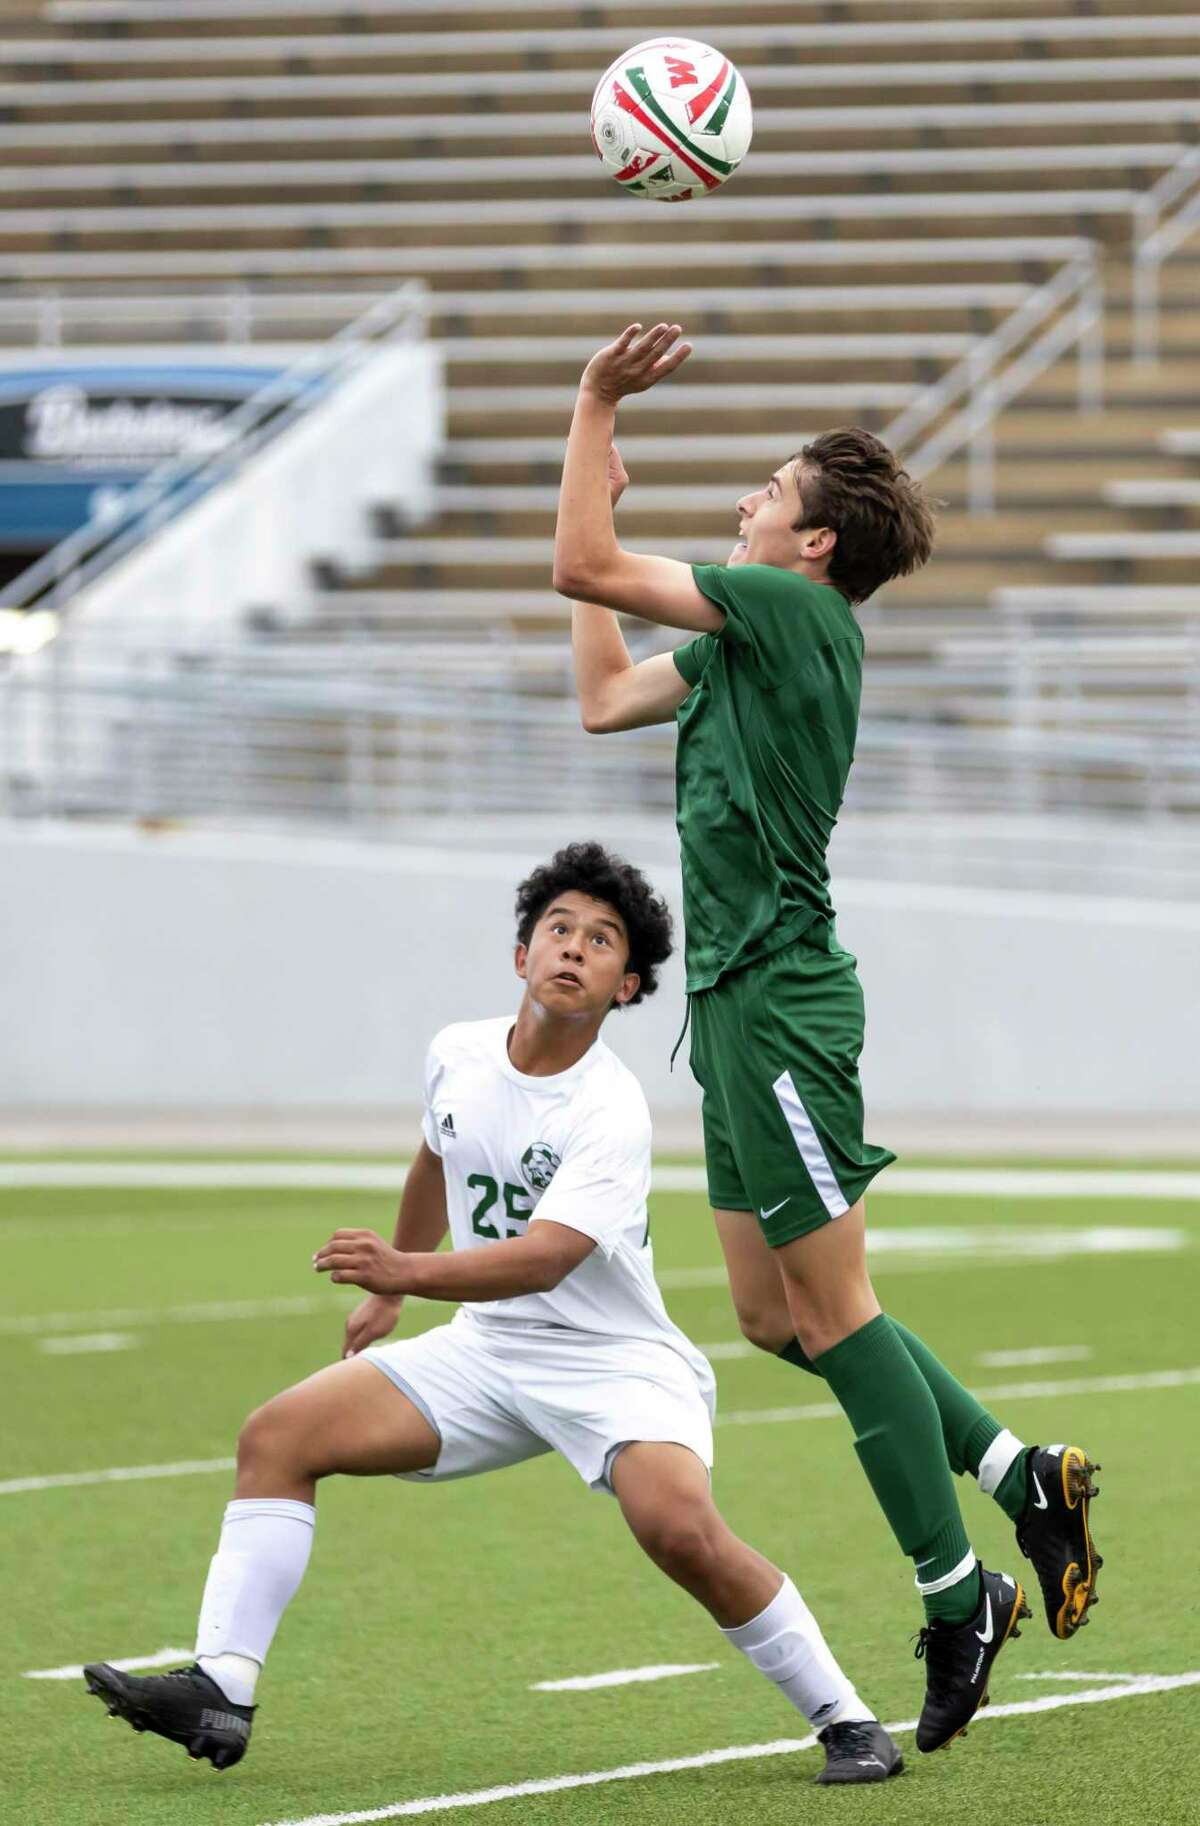 The Woodlands midfielder Andy Davison (5) attempts to take control of the ball while under pressure from Klein Forest’s Joshua Reyes (25) during the first half of a Highlander Invitational soccer match at Woodforest Bank Stadium, Friday, Jan. 22, 2021, in Shenandoah.